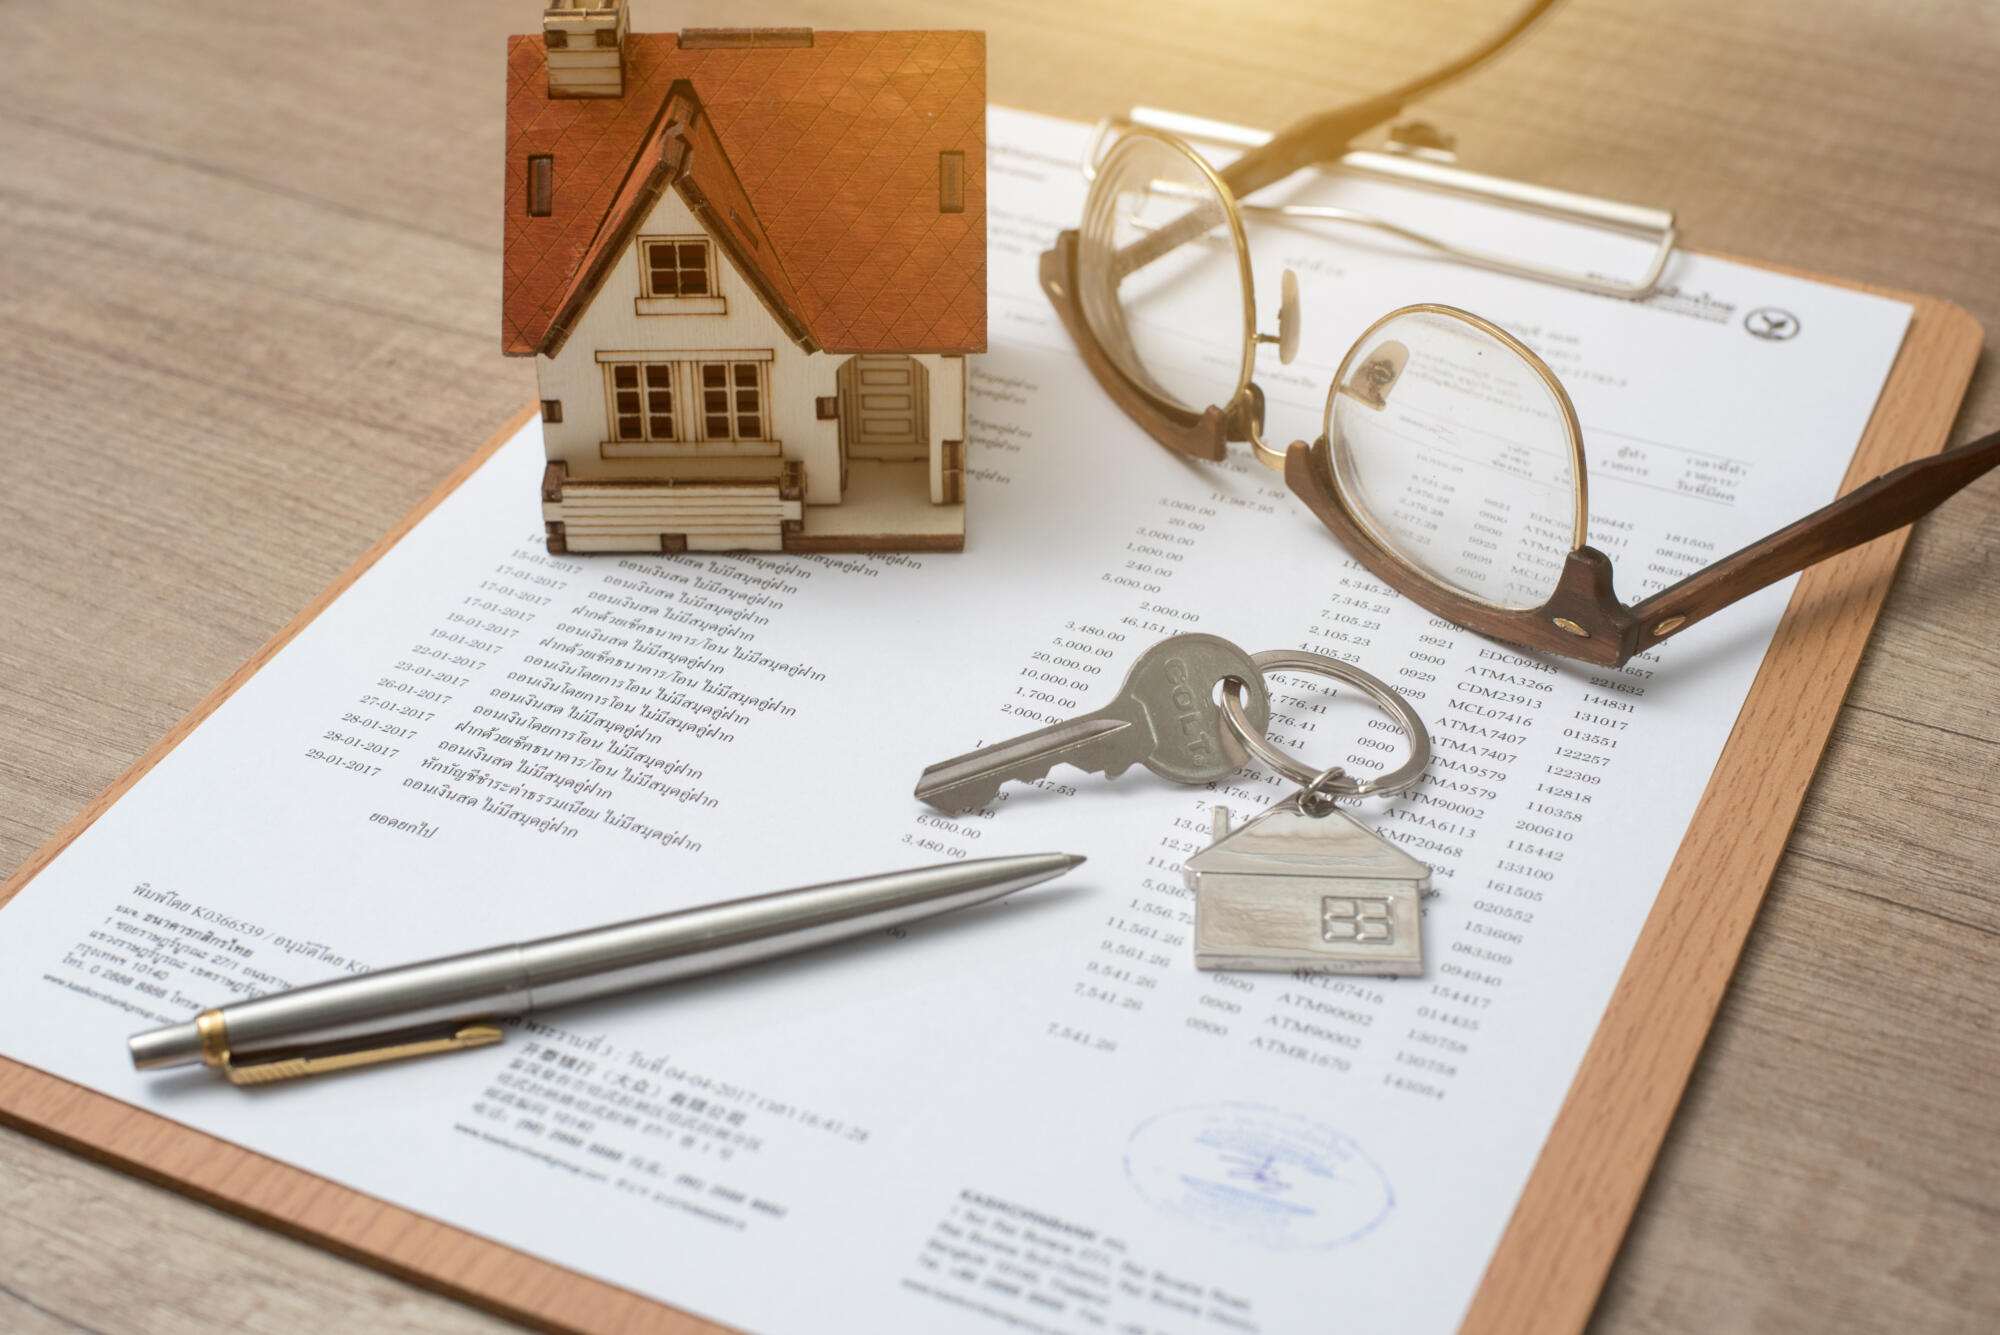 A house model and a mortgage document on a wooden table.